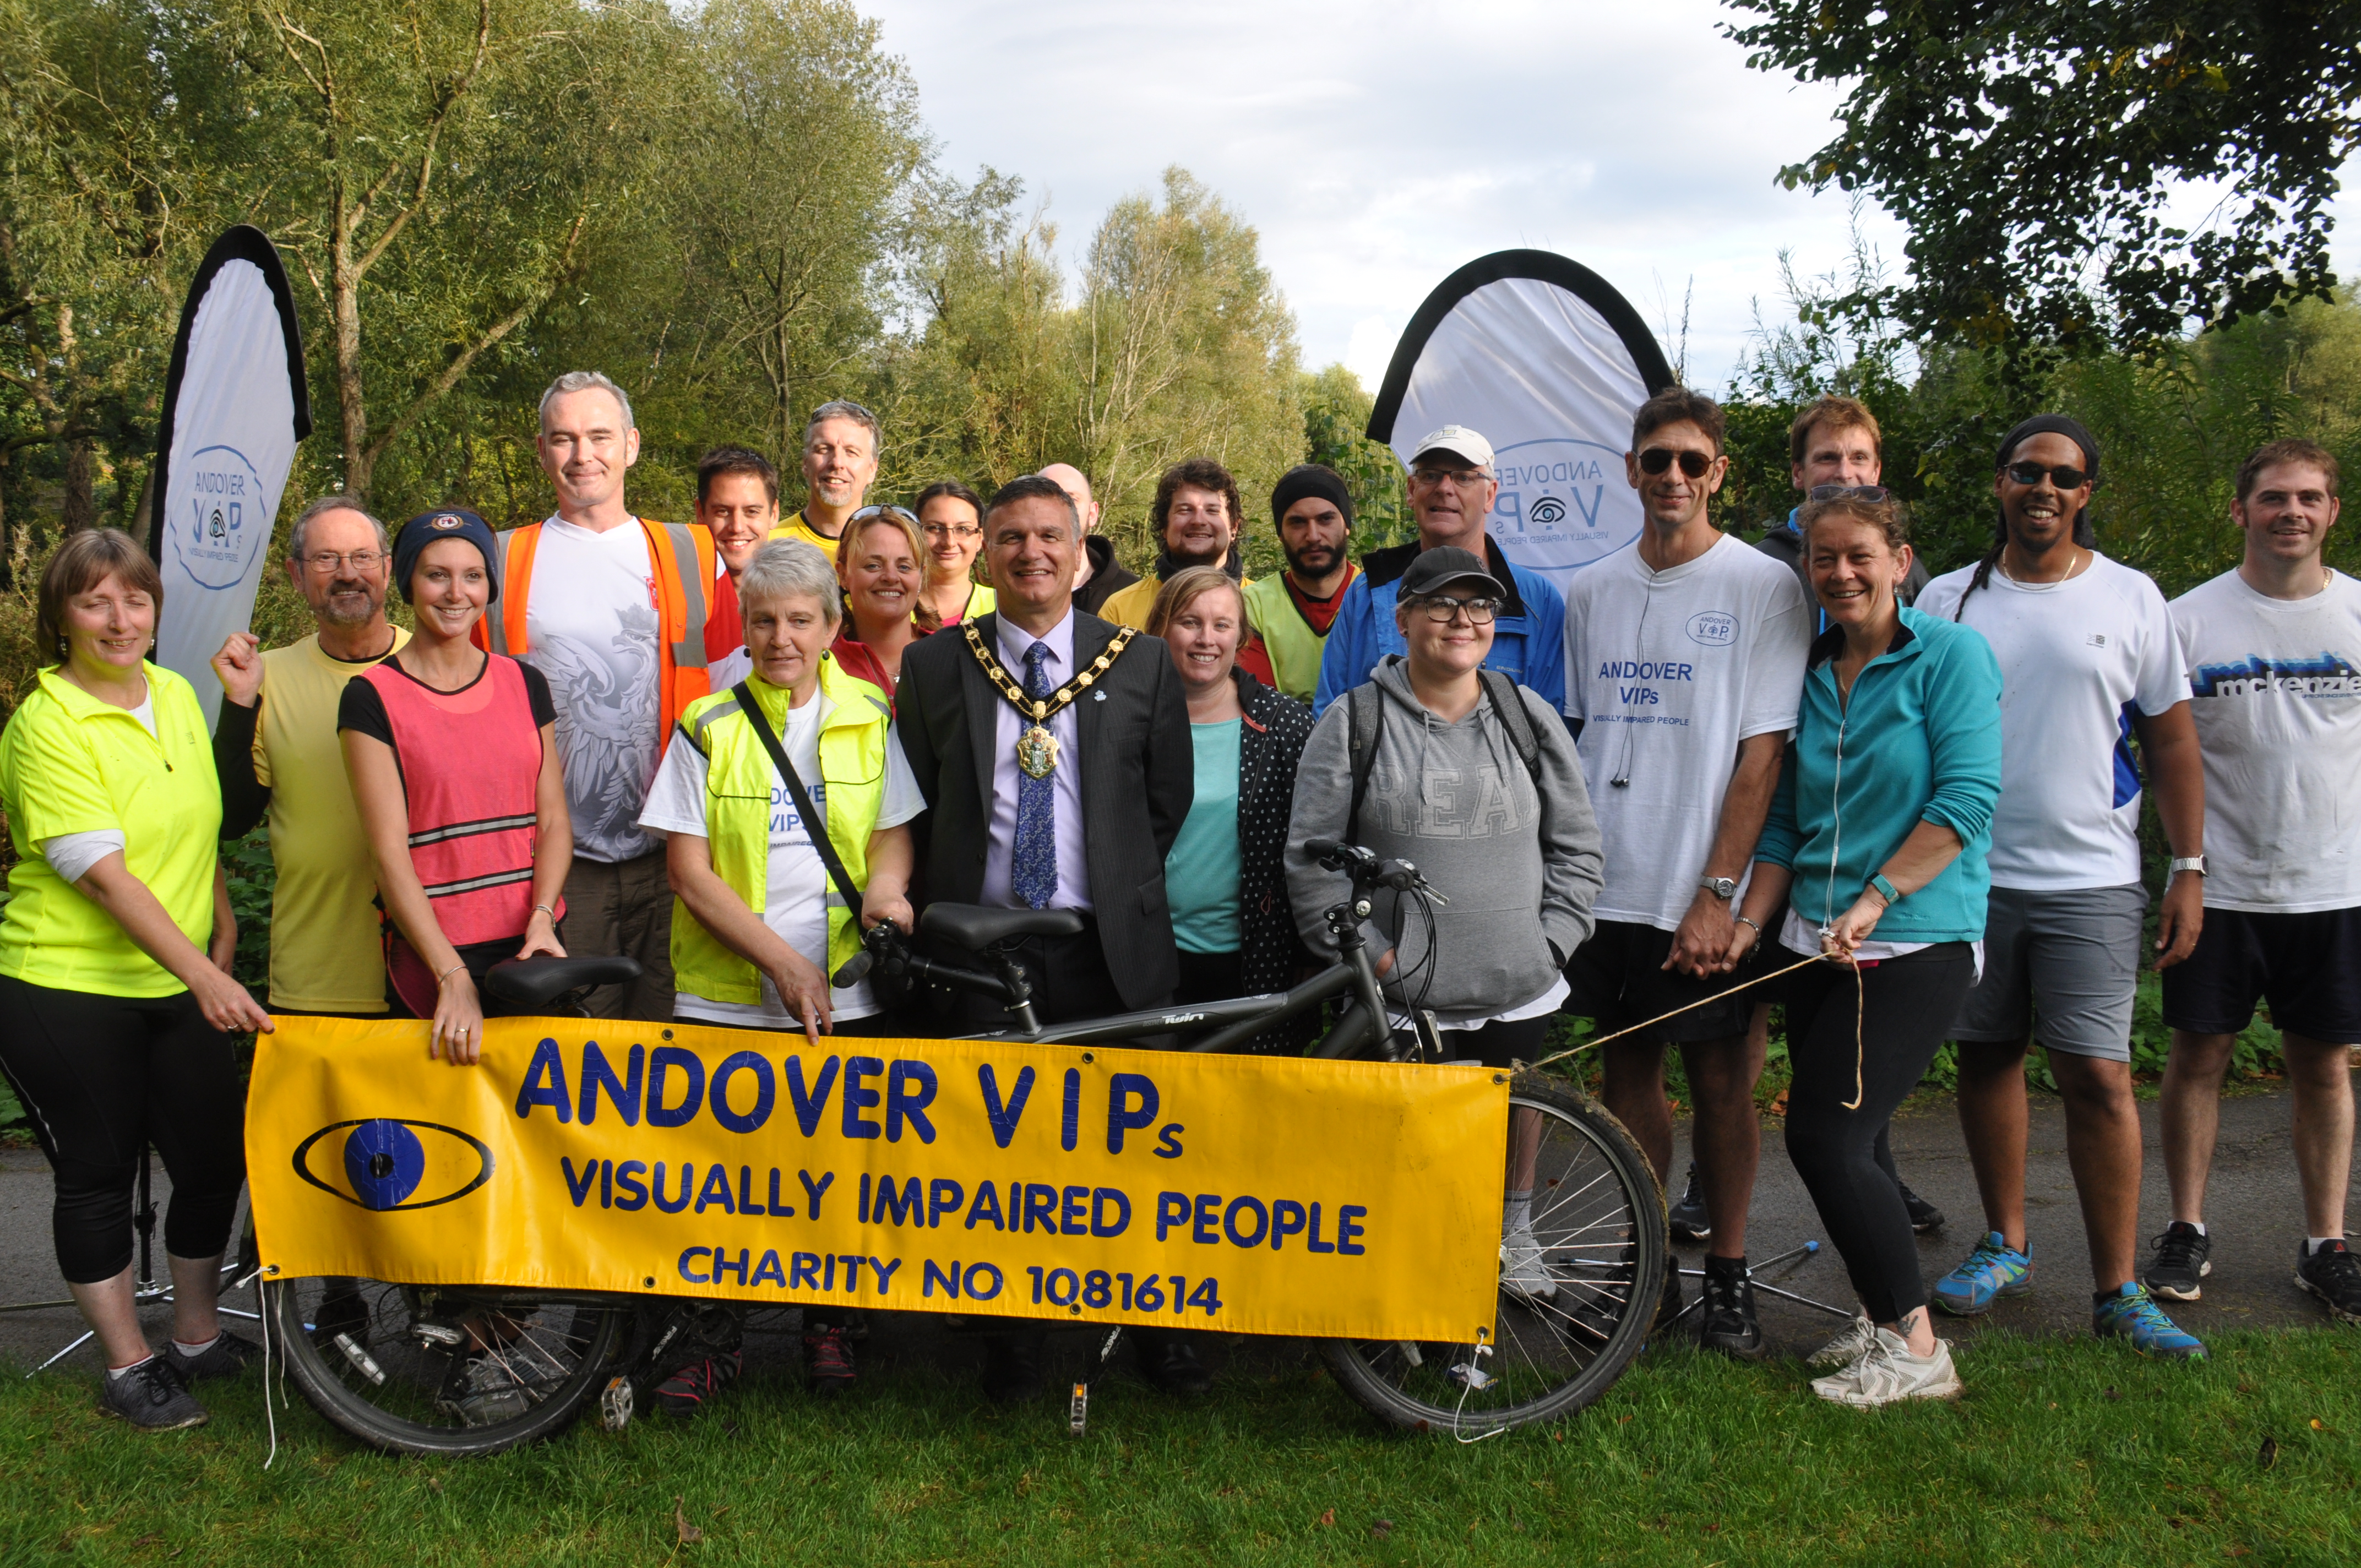 CoolLED for the Andover VIPs Charity